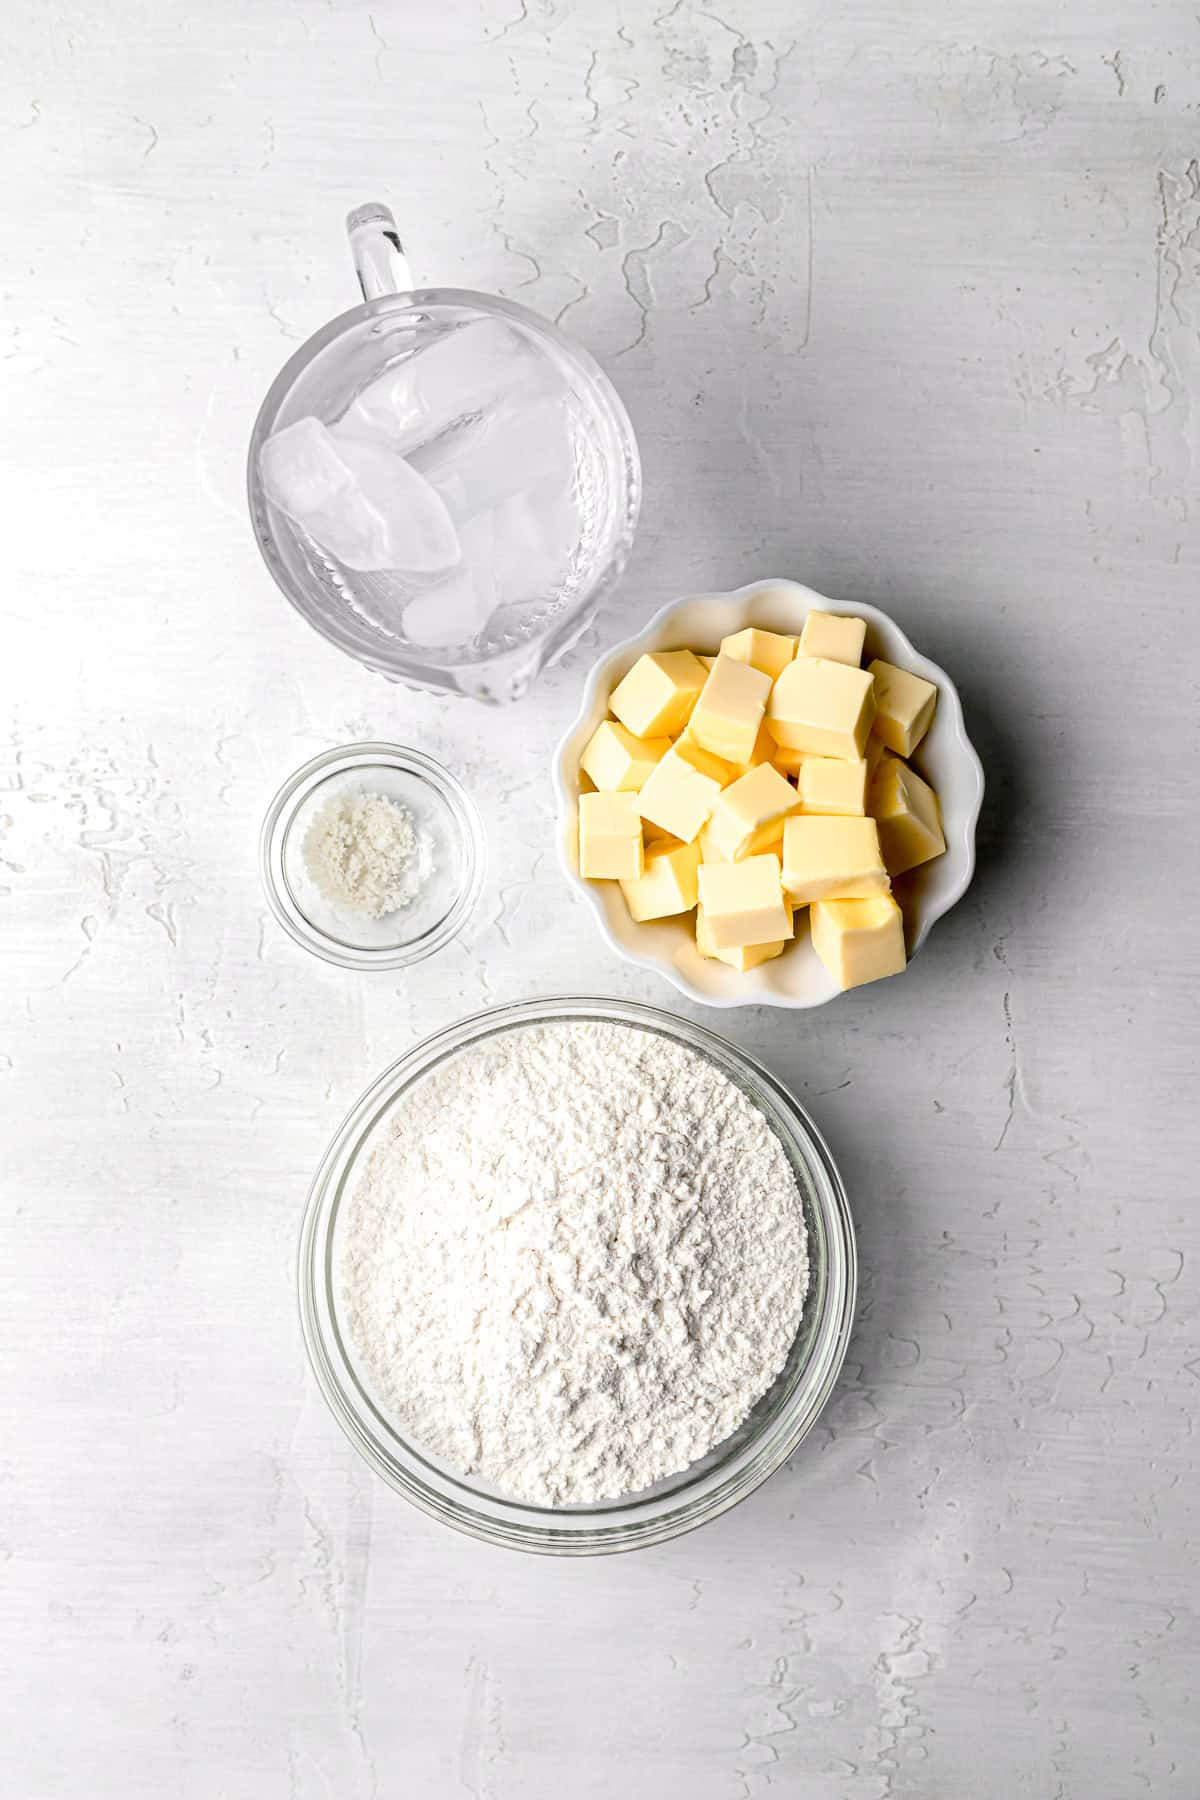 ingredients for pie dough.